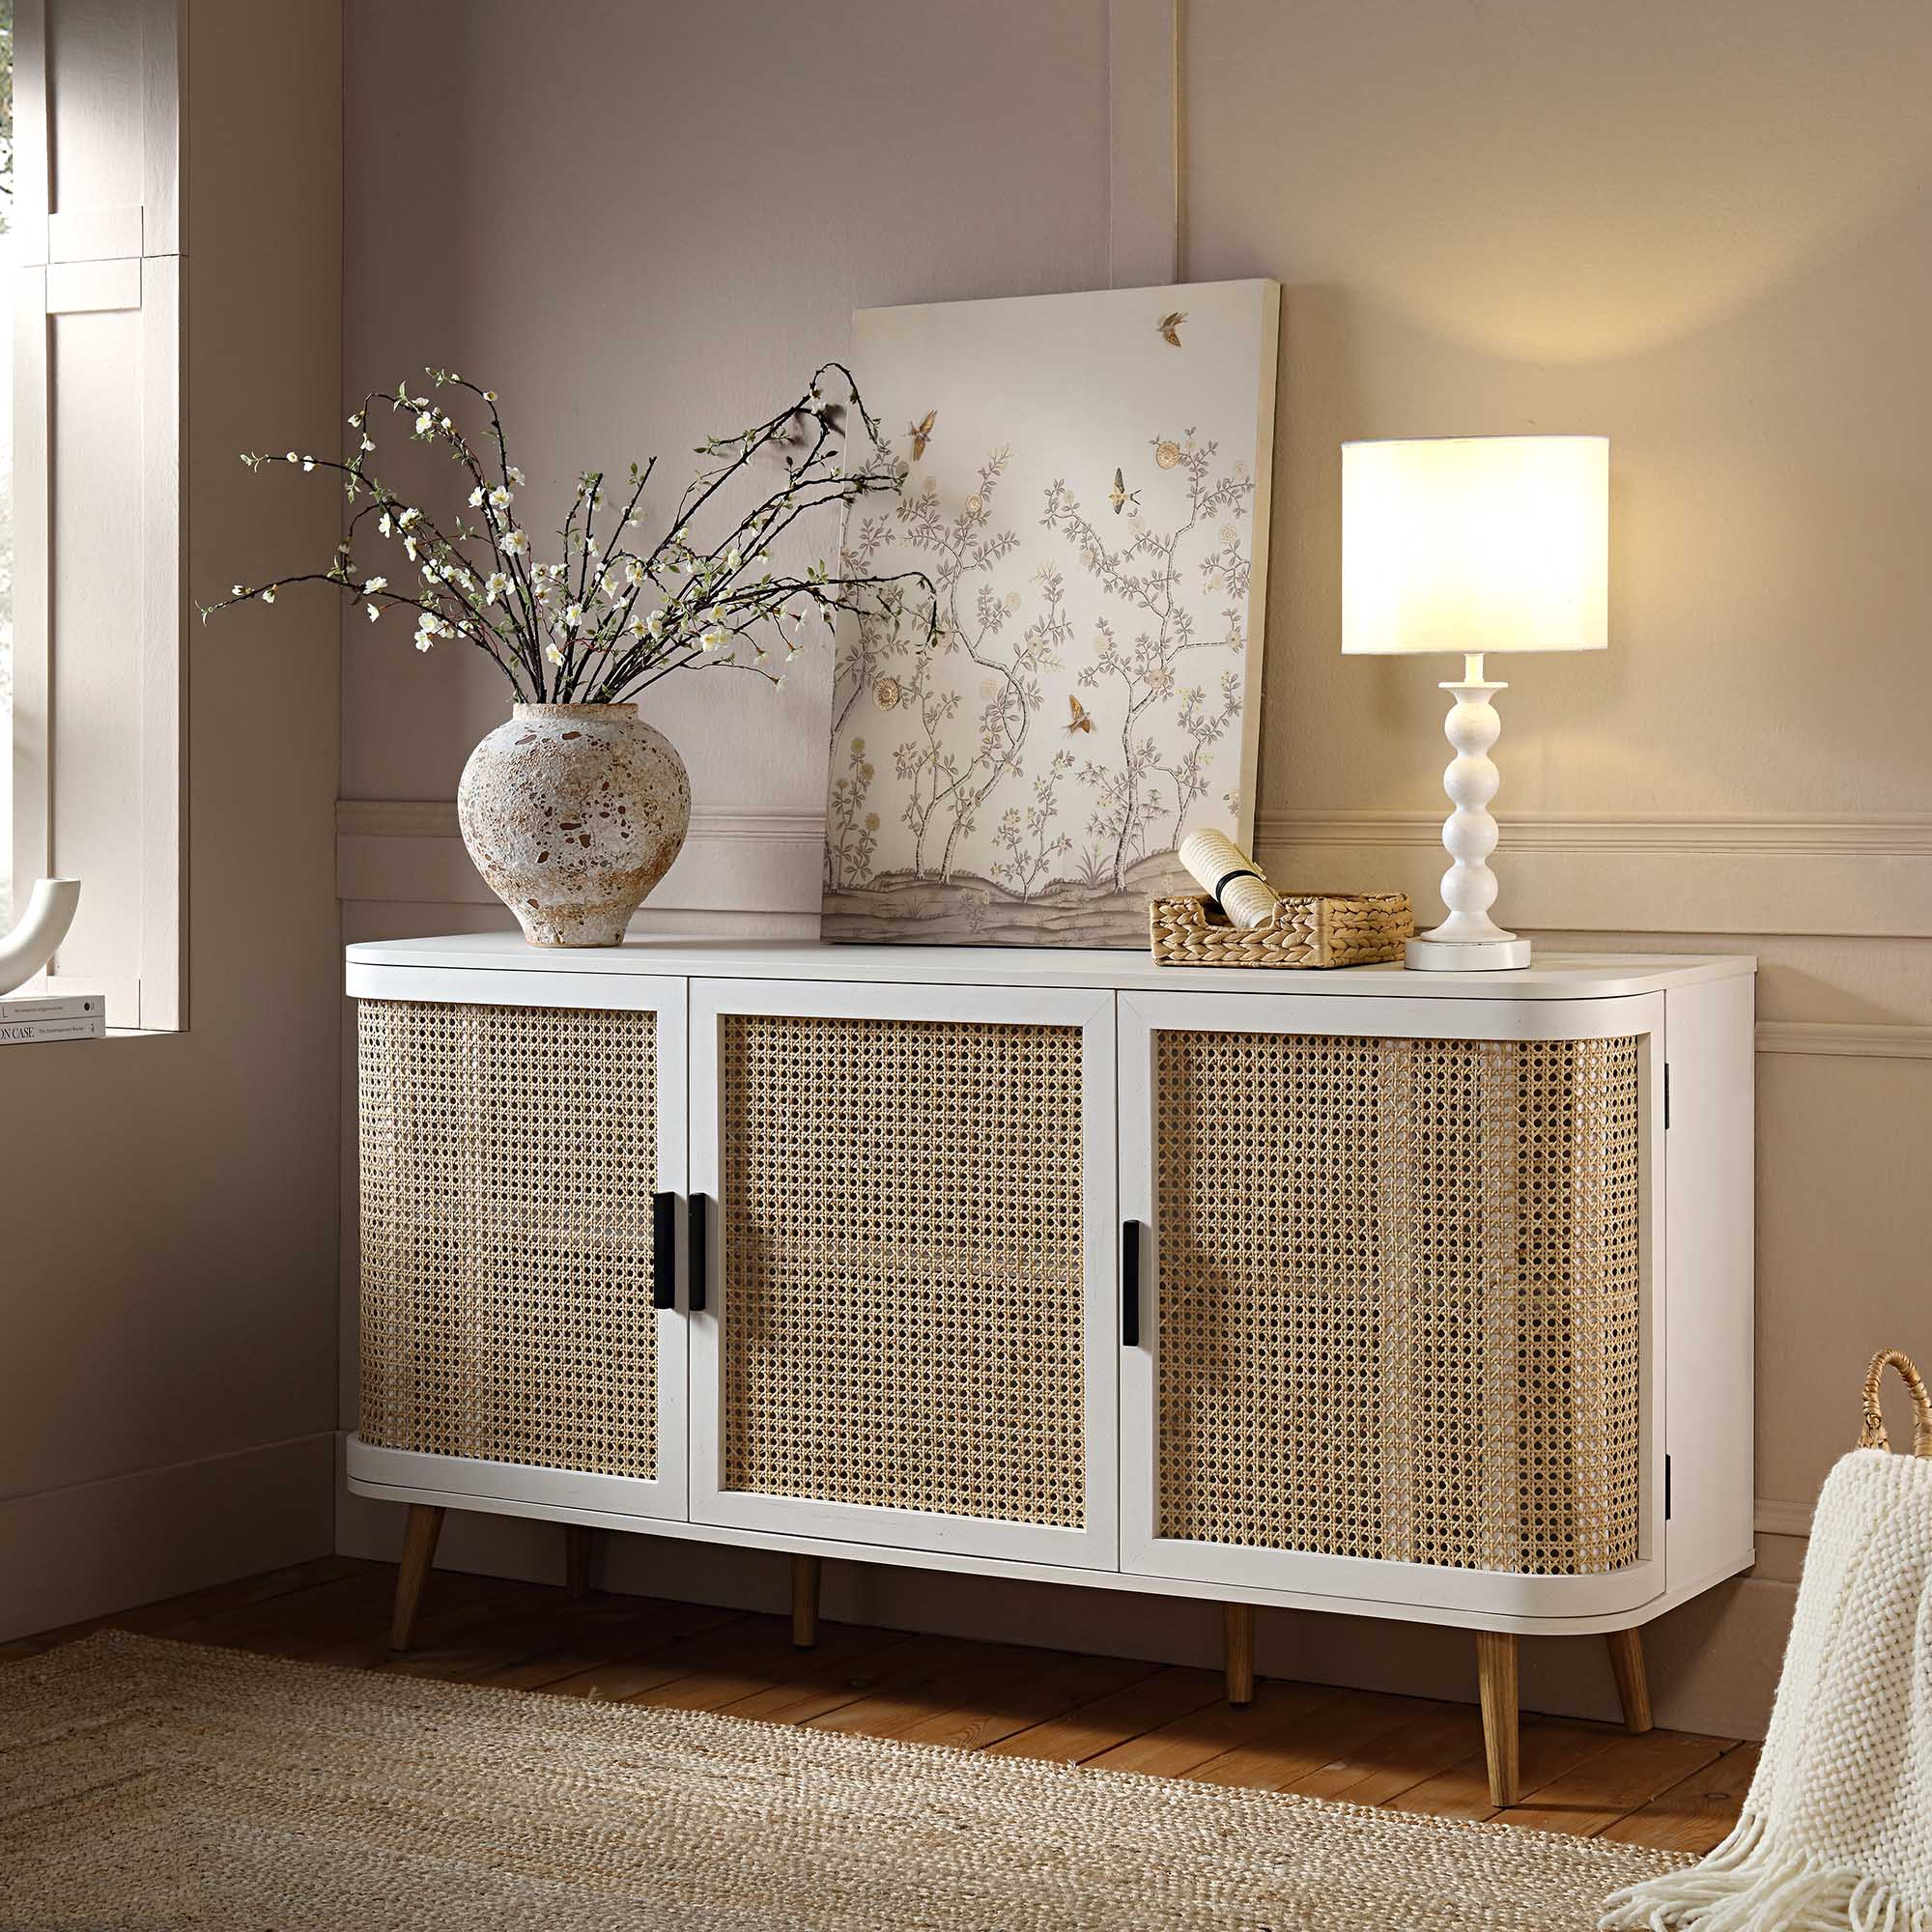 Izzy Curved Rattan Large 3-Door Sideboard, White